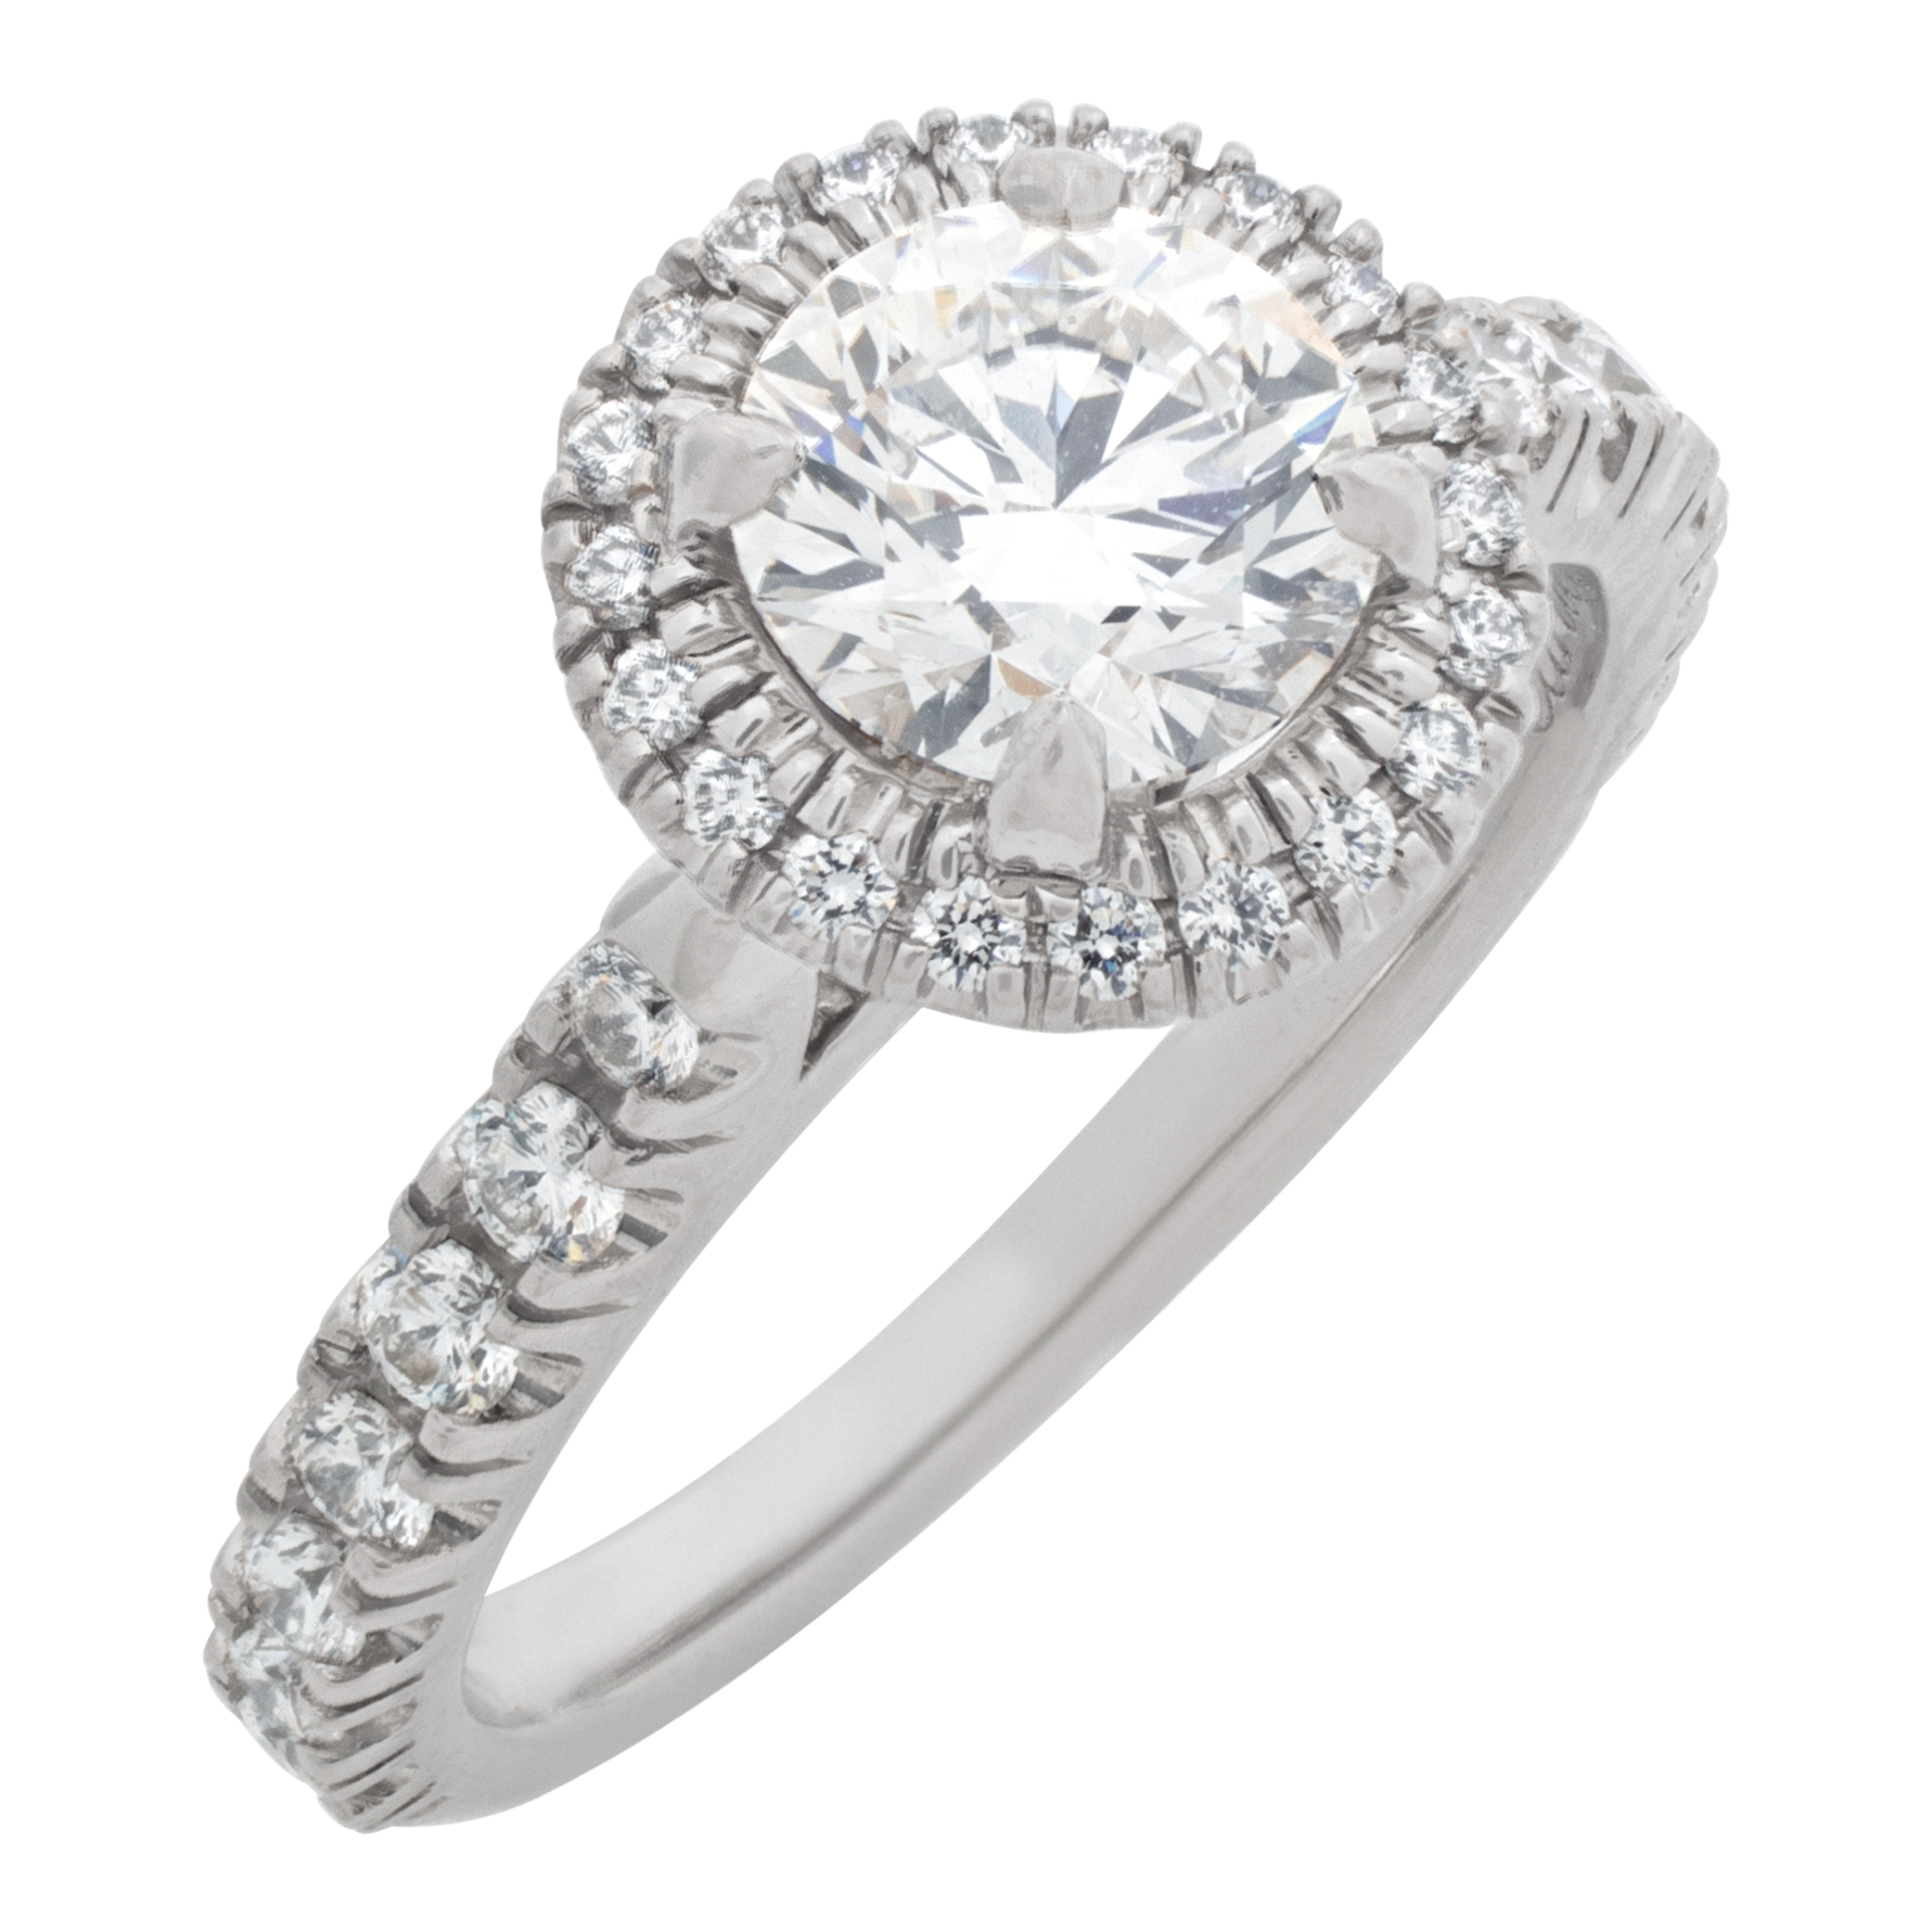 Cartier "Destinee" collection, GIA certified 0.73 carat full ct round brilliant diamond set in a halo platinum setting. image 3